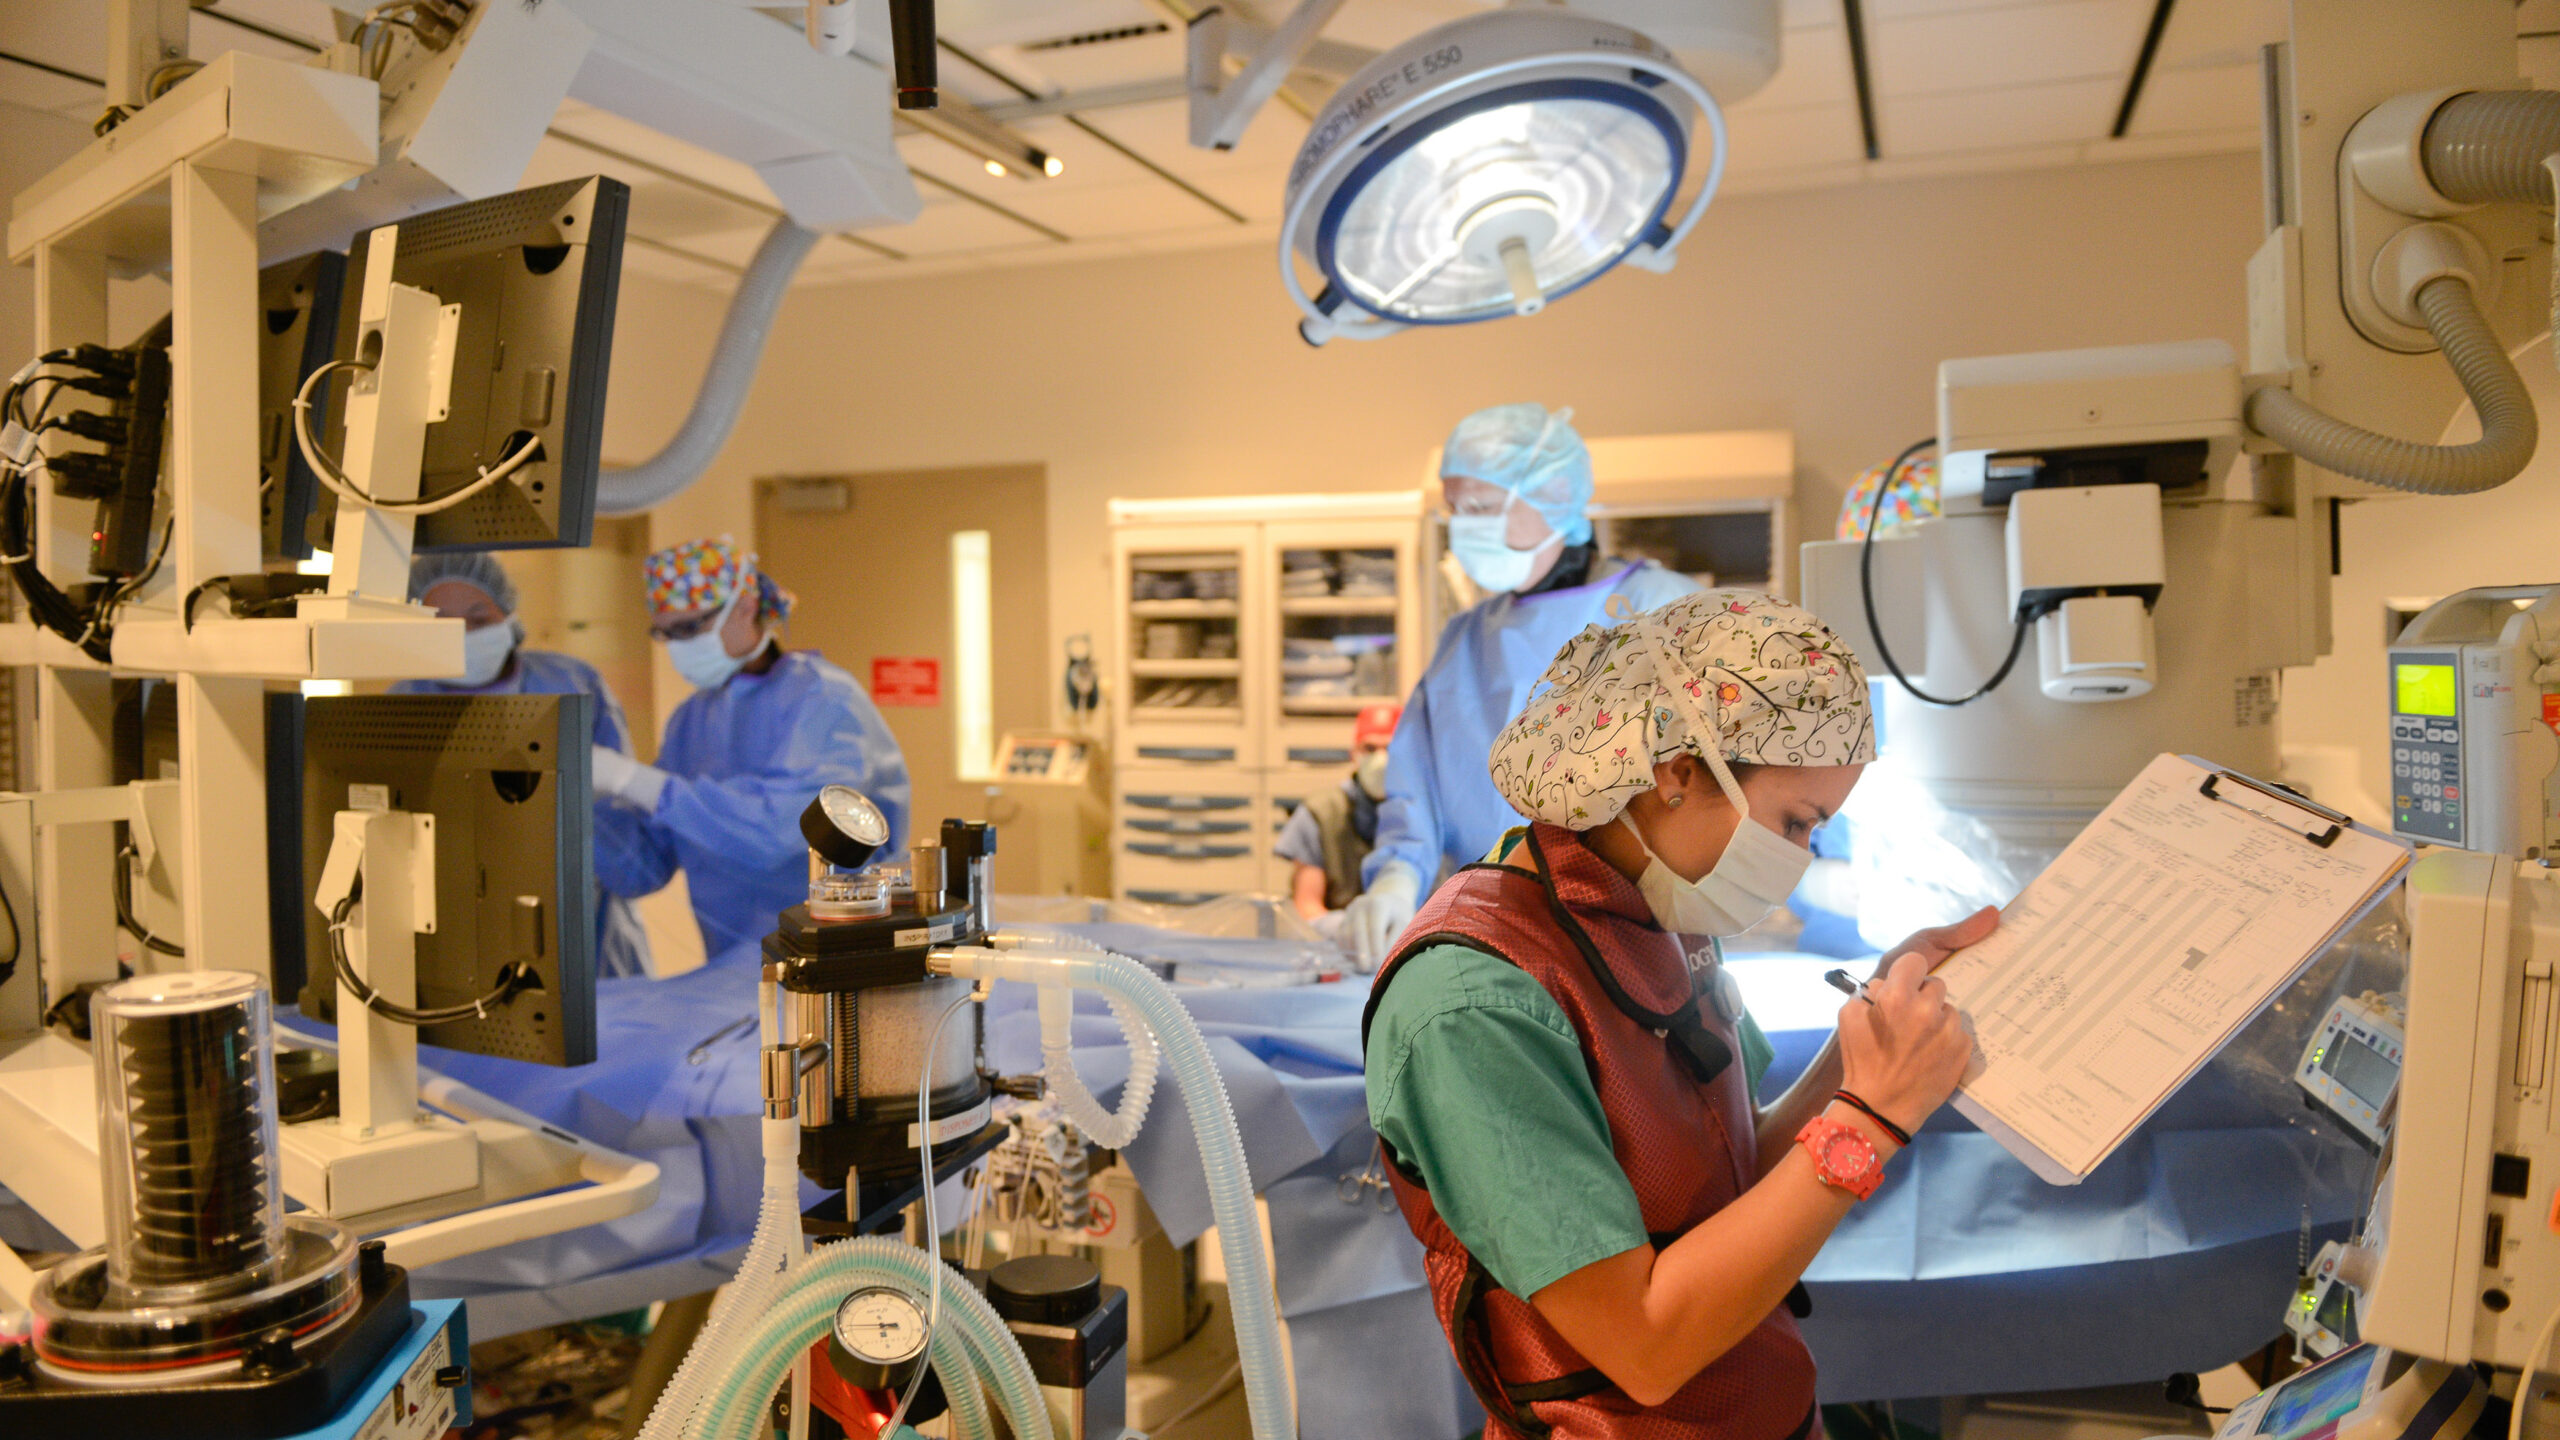 A surgery is performed on a dog at the College of Vet Med at the Biomedical campus. Photo by Marc Hall